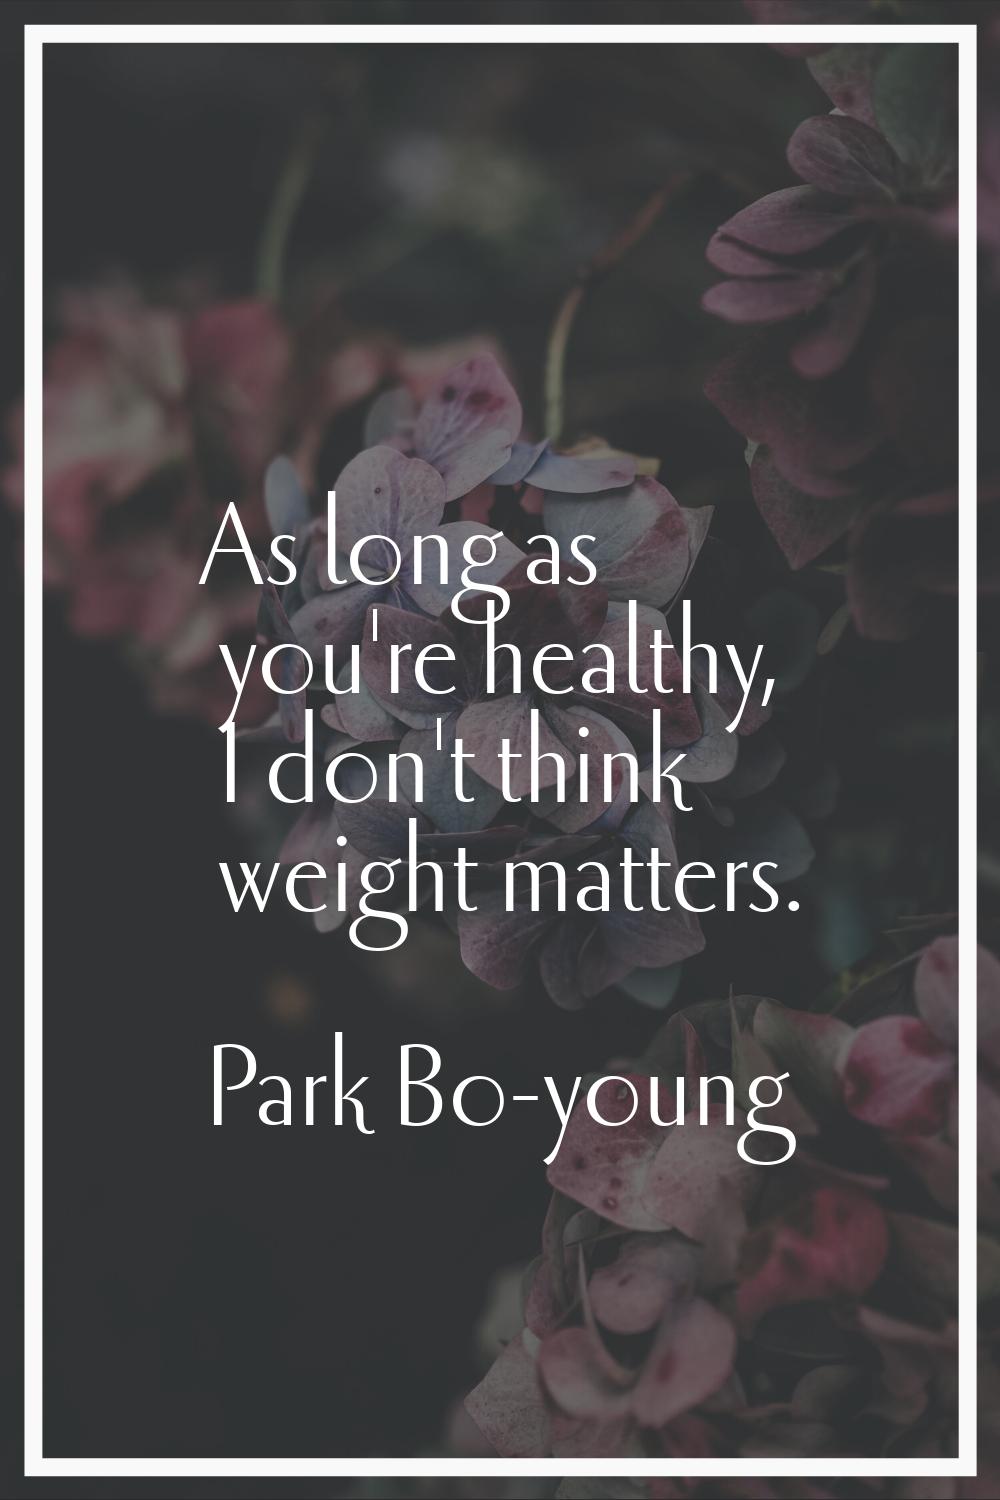 As long as you're healthy, I don't think weight matters.